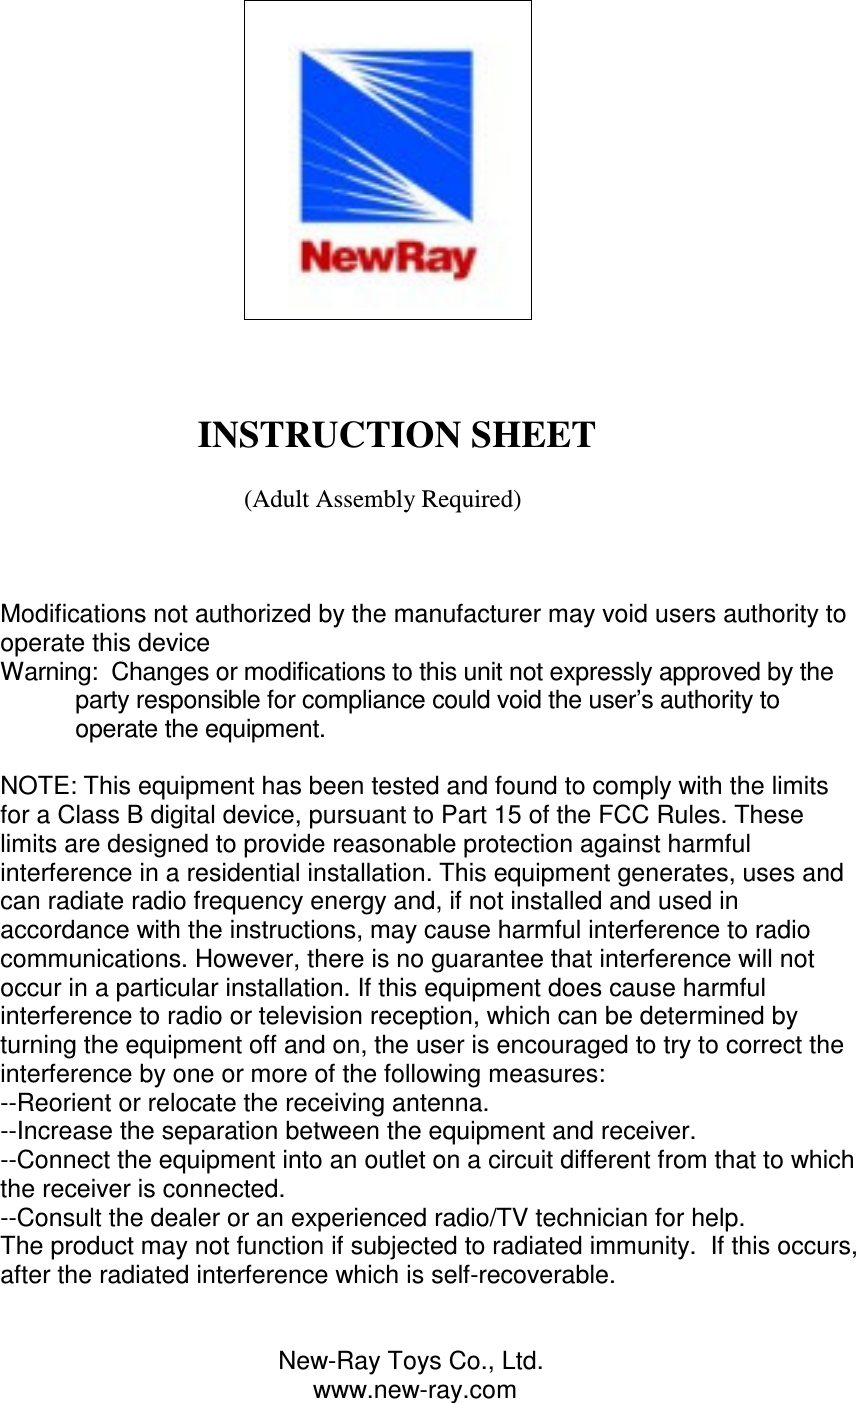                                                                                                                          INSTRUCTION SHEET                                           (Adult Assembly Required)    Modifications not authorized by the manufacturer may void users authority to operate this device Warning:  Changes or modifications to this unit not expressly approved by the party responsible for compliance could void the user’s authority to operate the equipment.  NOTE: This equipment has been tested and found to comply with the limits for a Class B digital device, pursuant to Part 15 of the FCC Rules. These limits are designed to provide reasonable protection against harmful interference in a residential installation. This equipment generates, uses and can radiate radio frequency energy and, if not installed and used in accordance with the instructions, may cause harmful interference to radio communications. However, there is no guarantee that interference will not occur in a particular installation. If this equipment does cause harmful interference to radio or television reception, which can be determined by turning the equipment off and on, the user is encouraged to try to correct the interference by one or more of the following measures: --Reorient or relocate the receiving antenna. --Increase the separation between the equipment and receiver. --Connect the equipment into an outlet on a circuit different from that to which the receiver is connected. --Consult the dealer or an experienced radio/TV technician for help. The product may not function if subjected to radiated immunity.  If this occurs, after the radiated interference which is self-recoverable.                                           New-Ray Toys Co., Ltd.                                              www.new-ray.com 